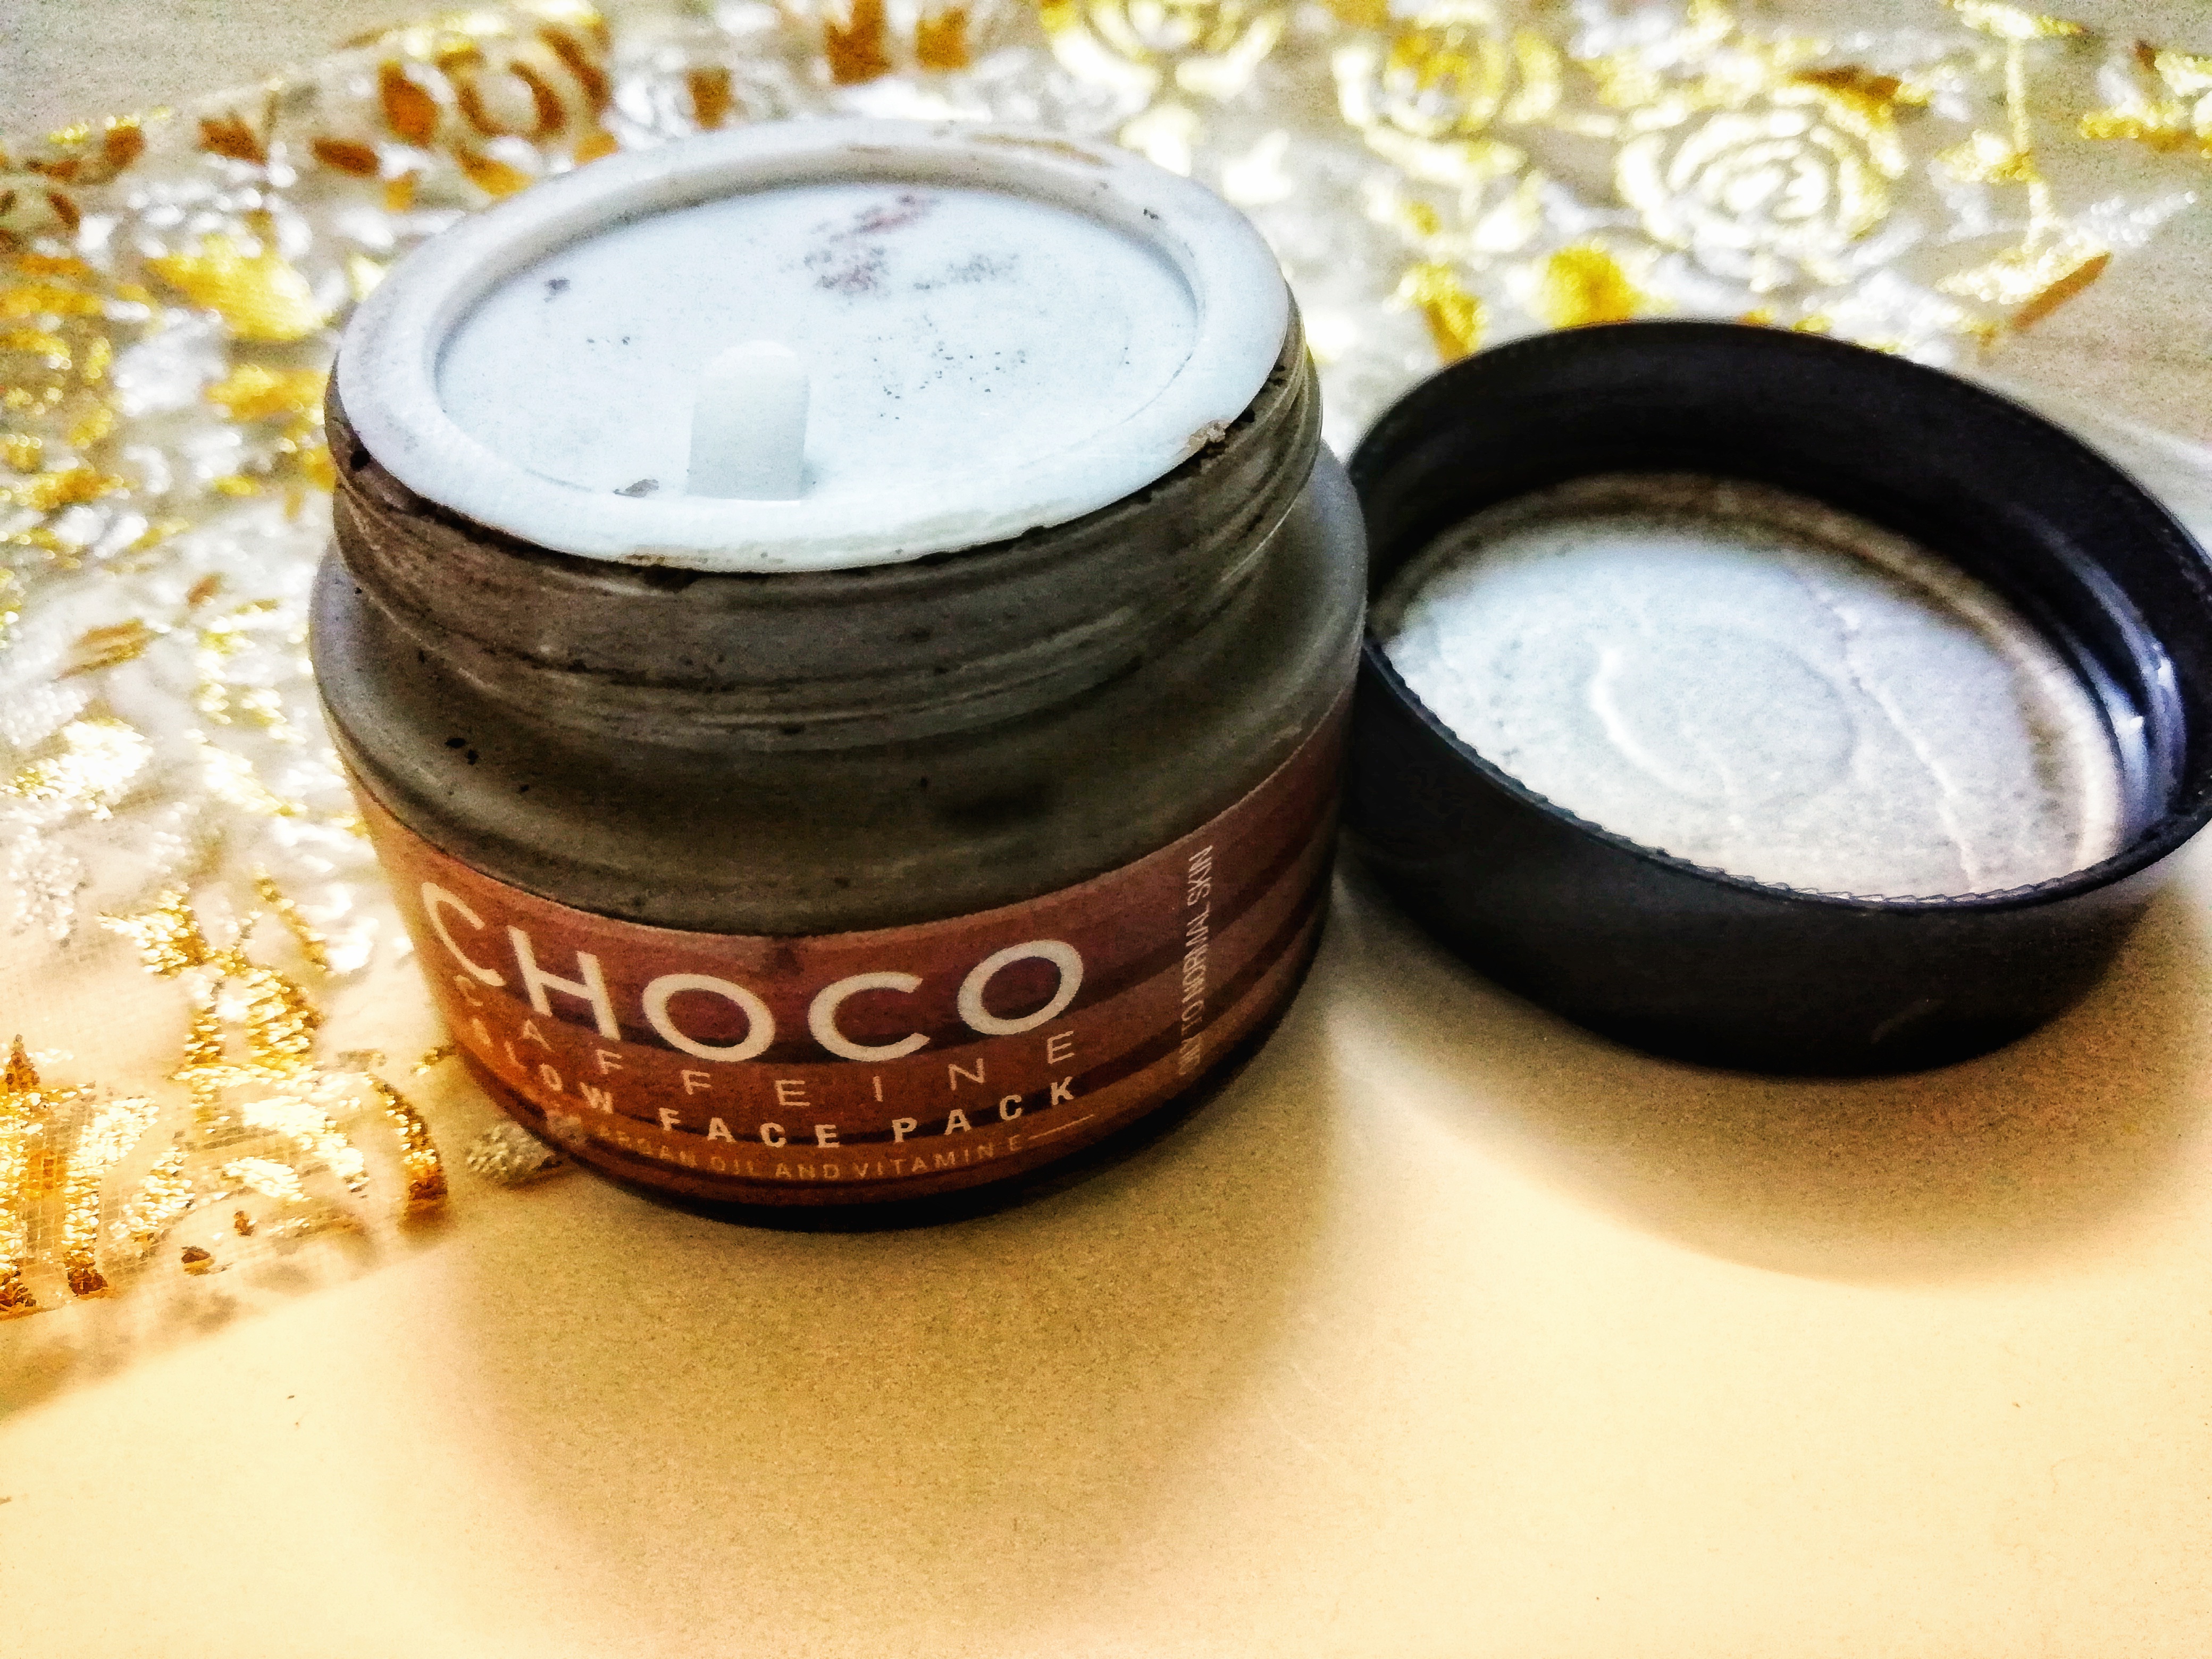 MCaffiene Choco Caffeine Glow Face Pack| Review